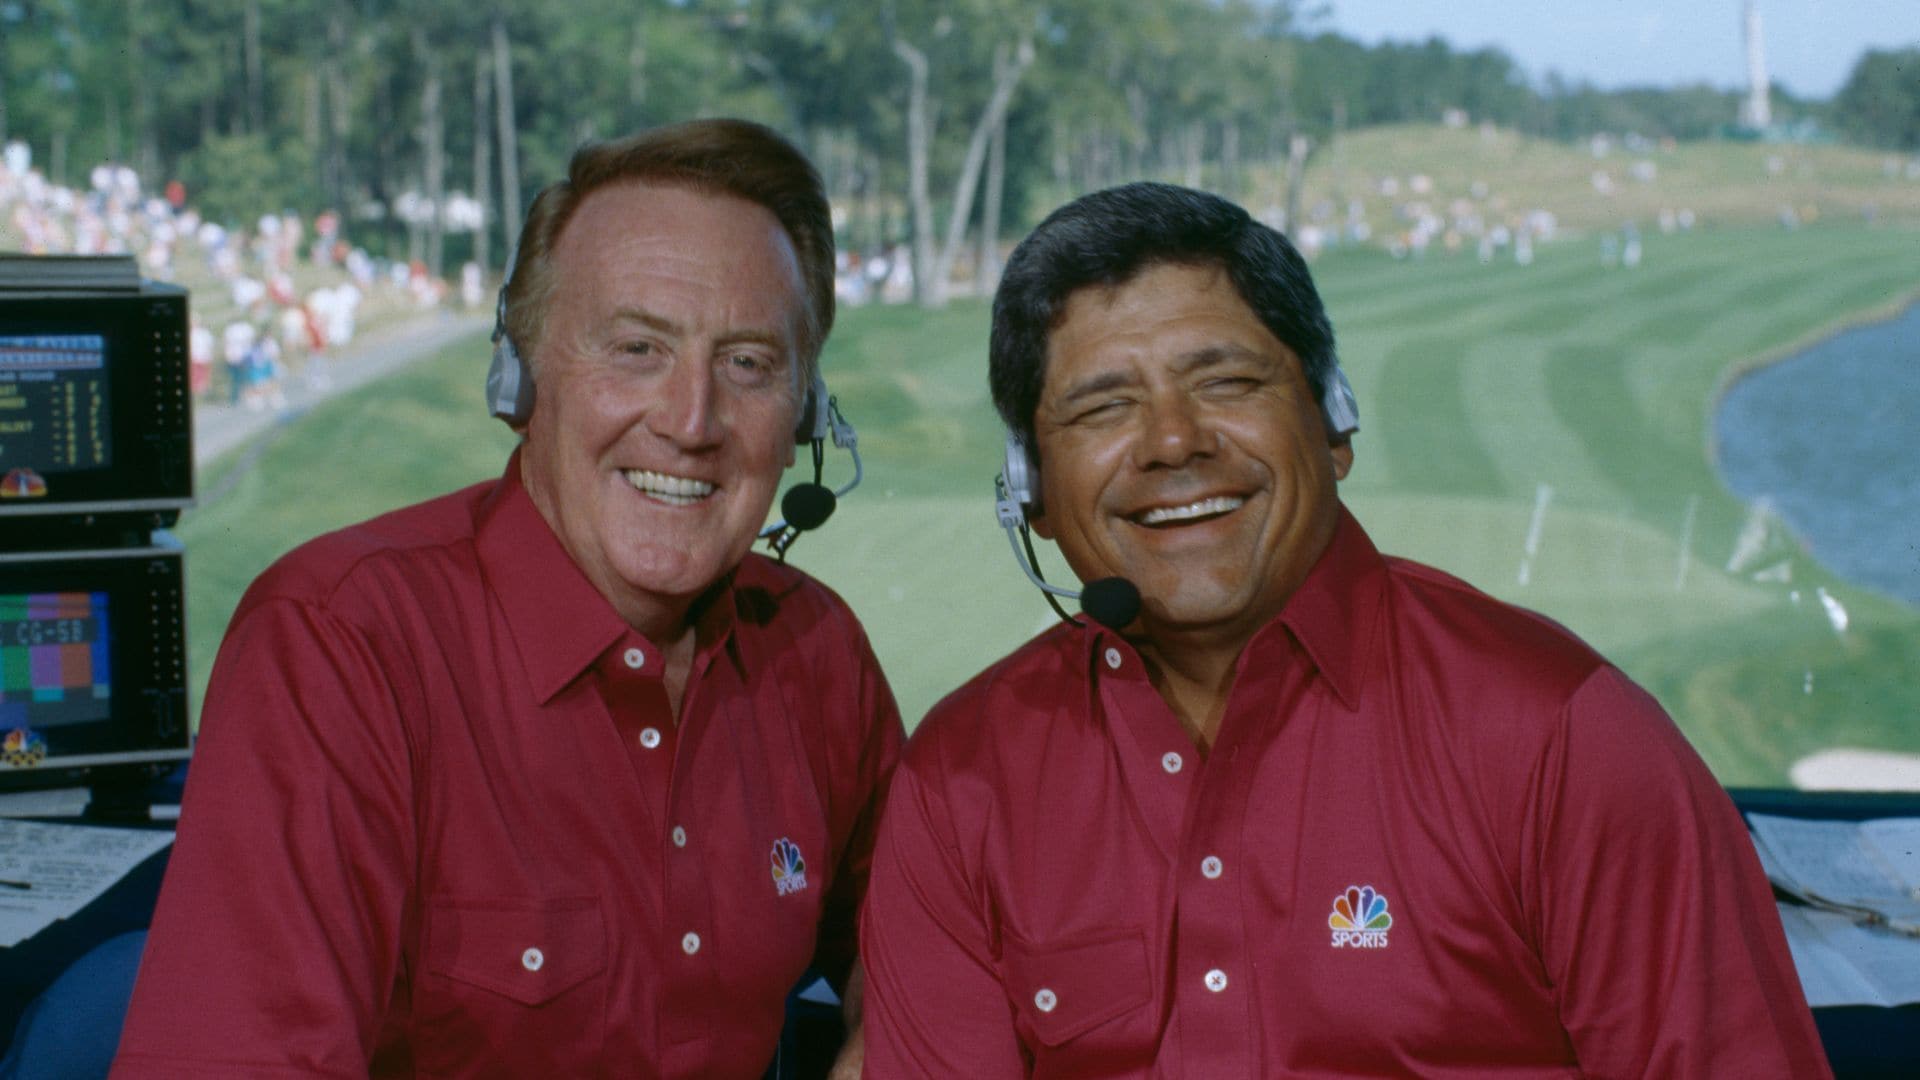 Amid a legendary career and life, Vin Scully was a fixture in golf